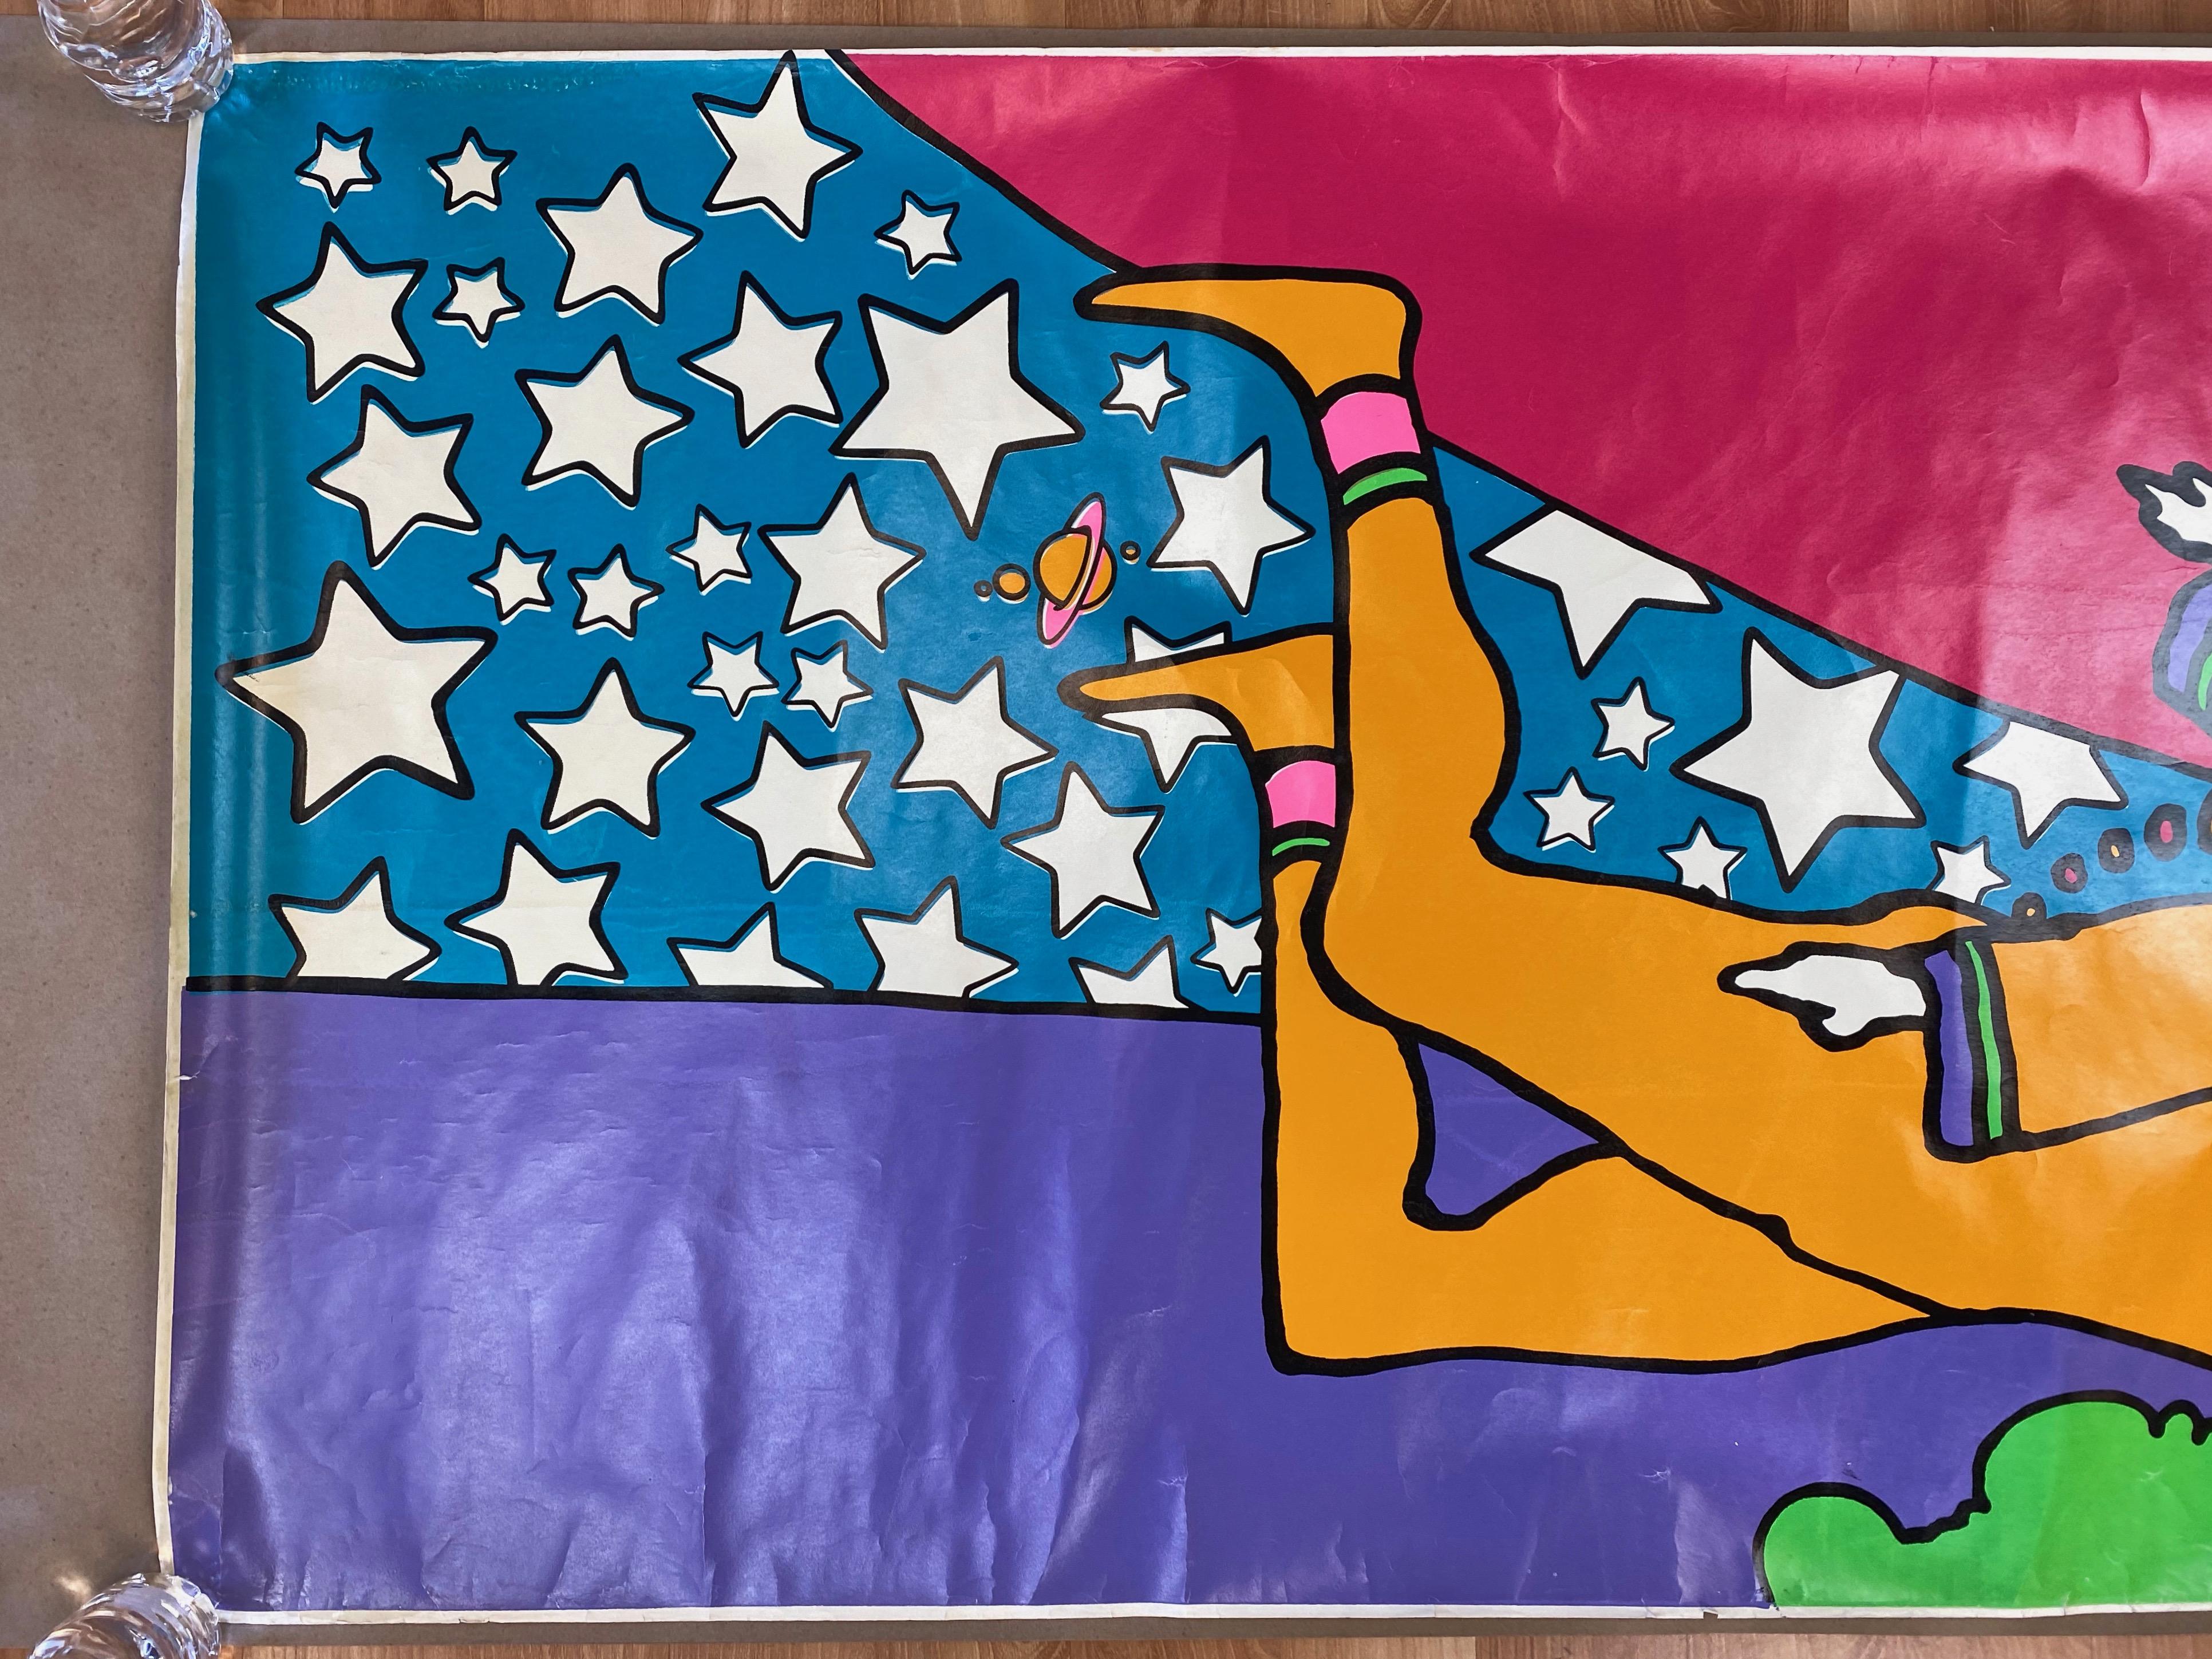 Mid-Century Modern Peter Max 12-Foot-Wide Serigraph for 1970 de Young Museum Solo Exhibition ‘B’ For Sale